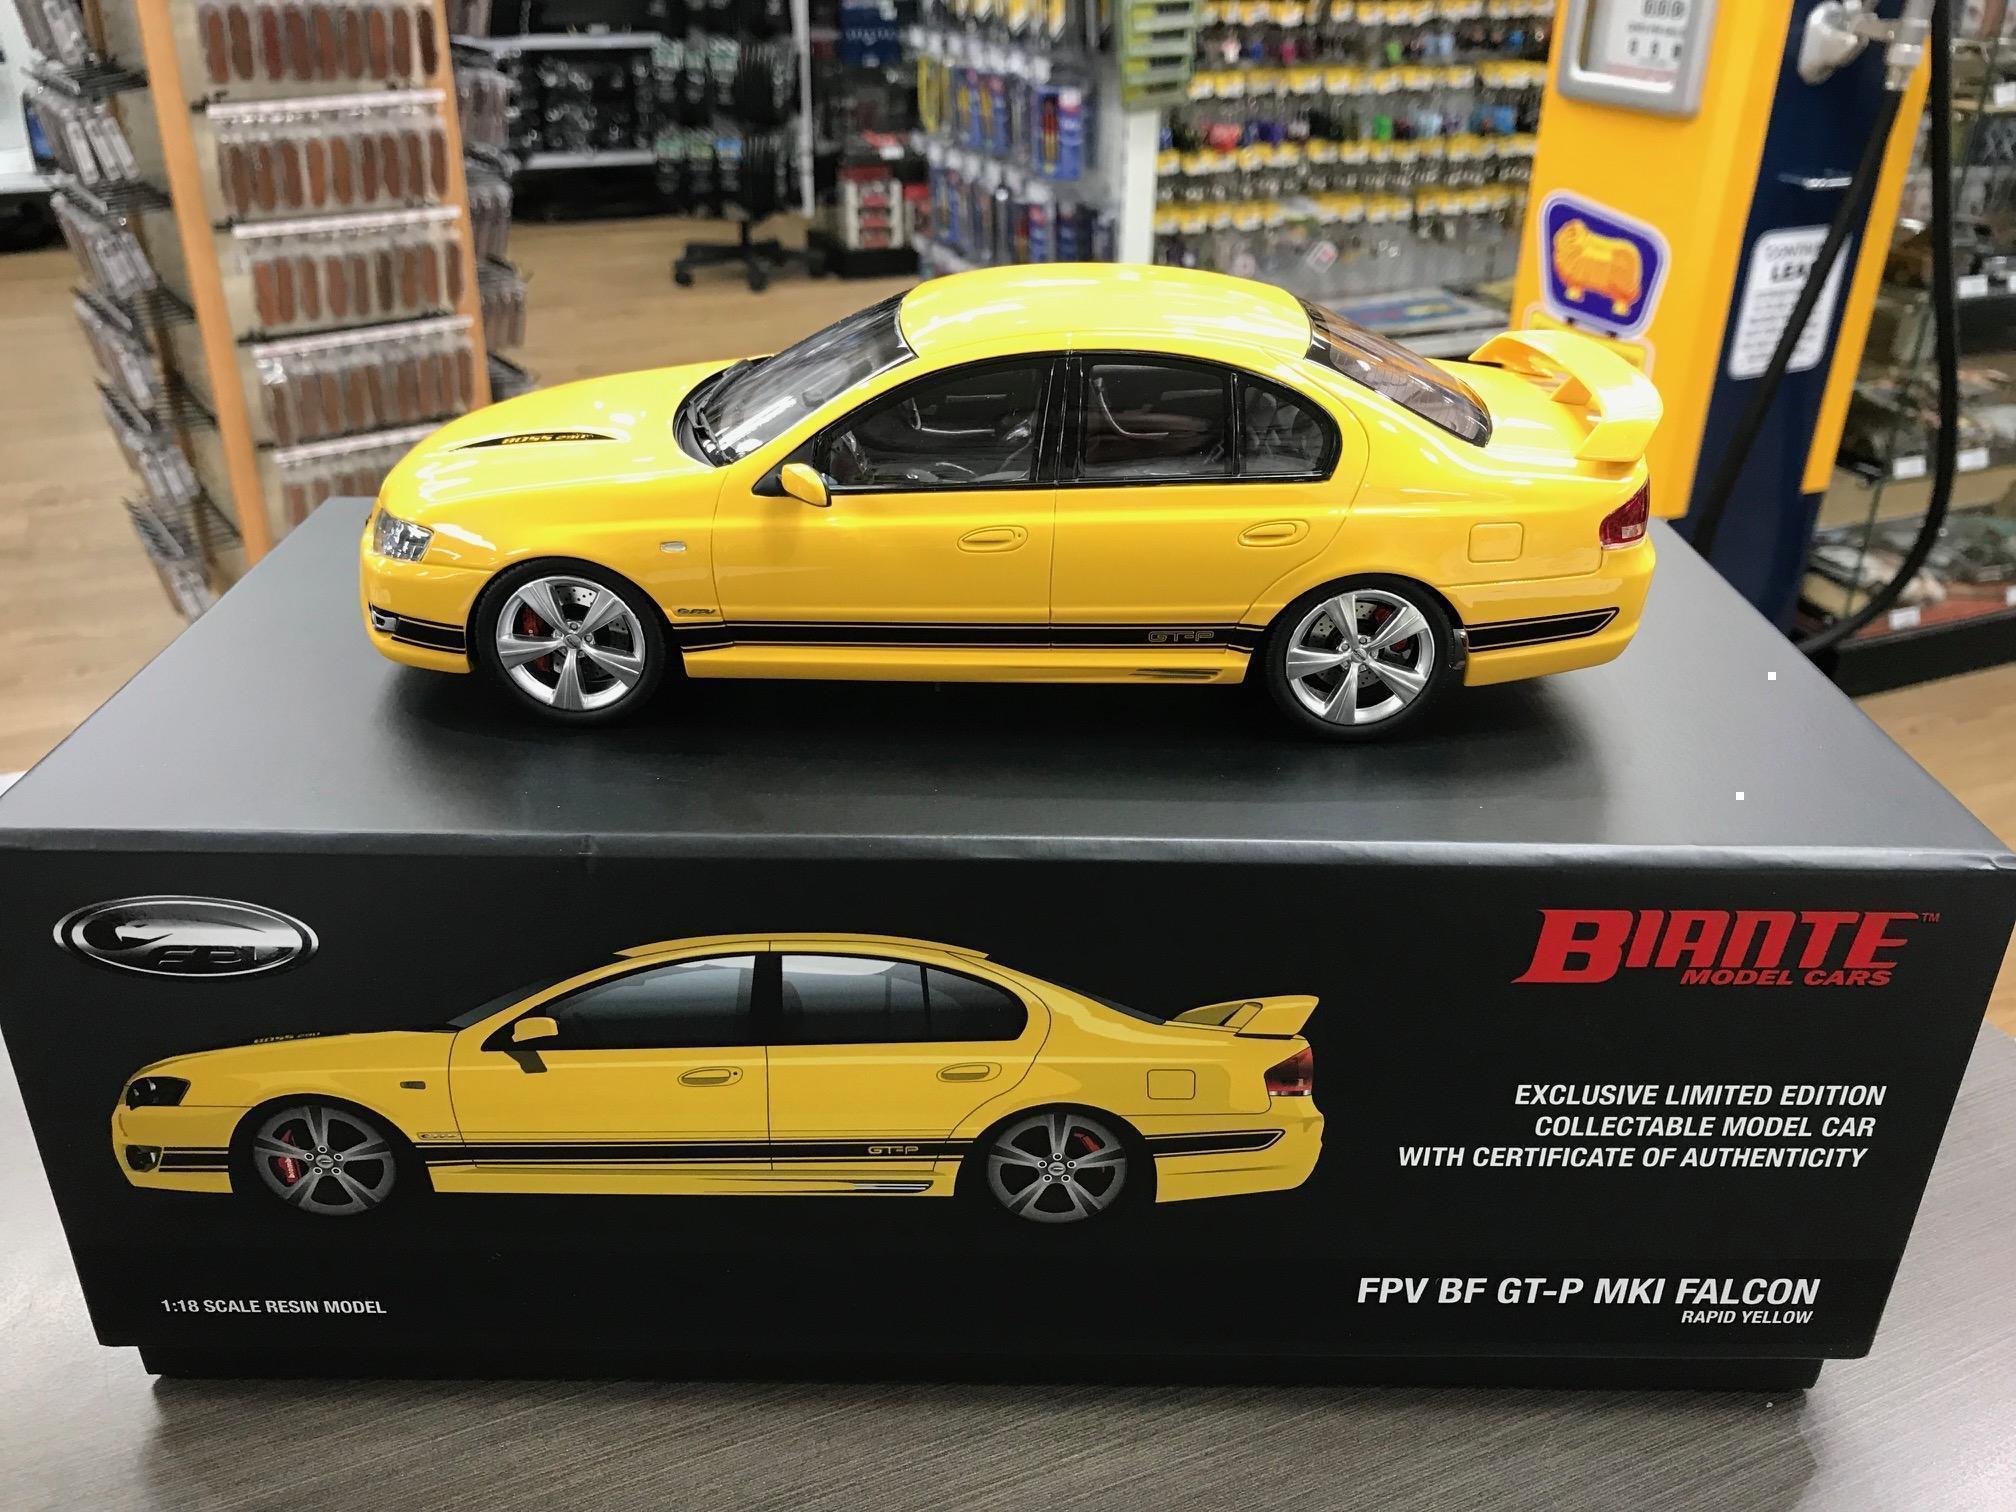 Ford FPV BF GT-P Rapid Yellow 1:18 Die Cast Scale Model Car 